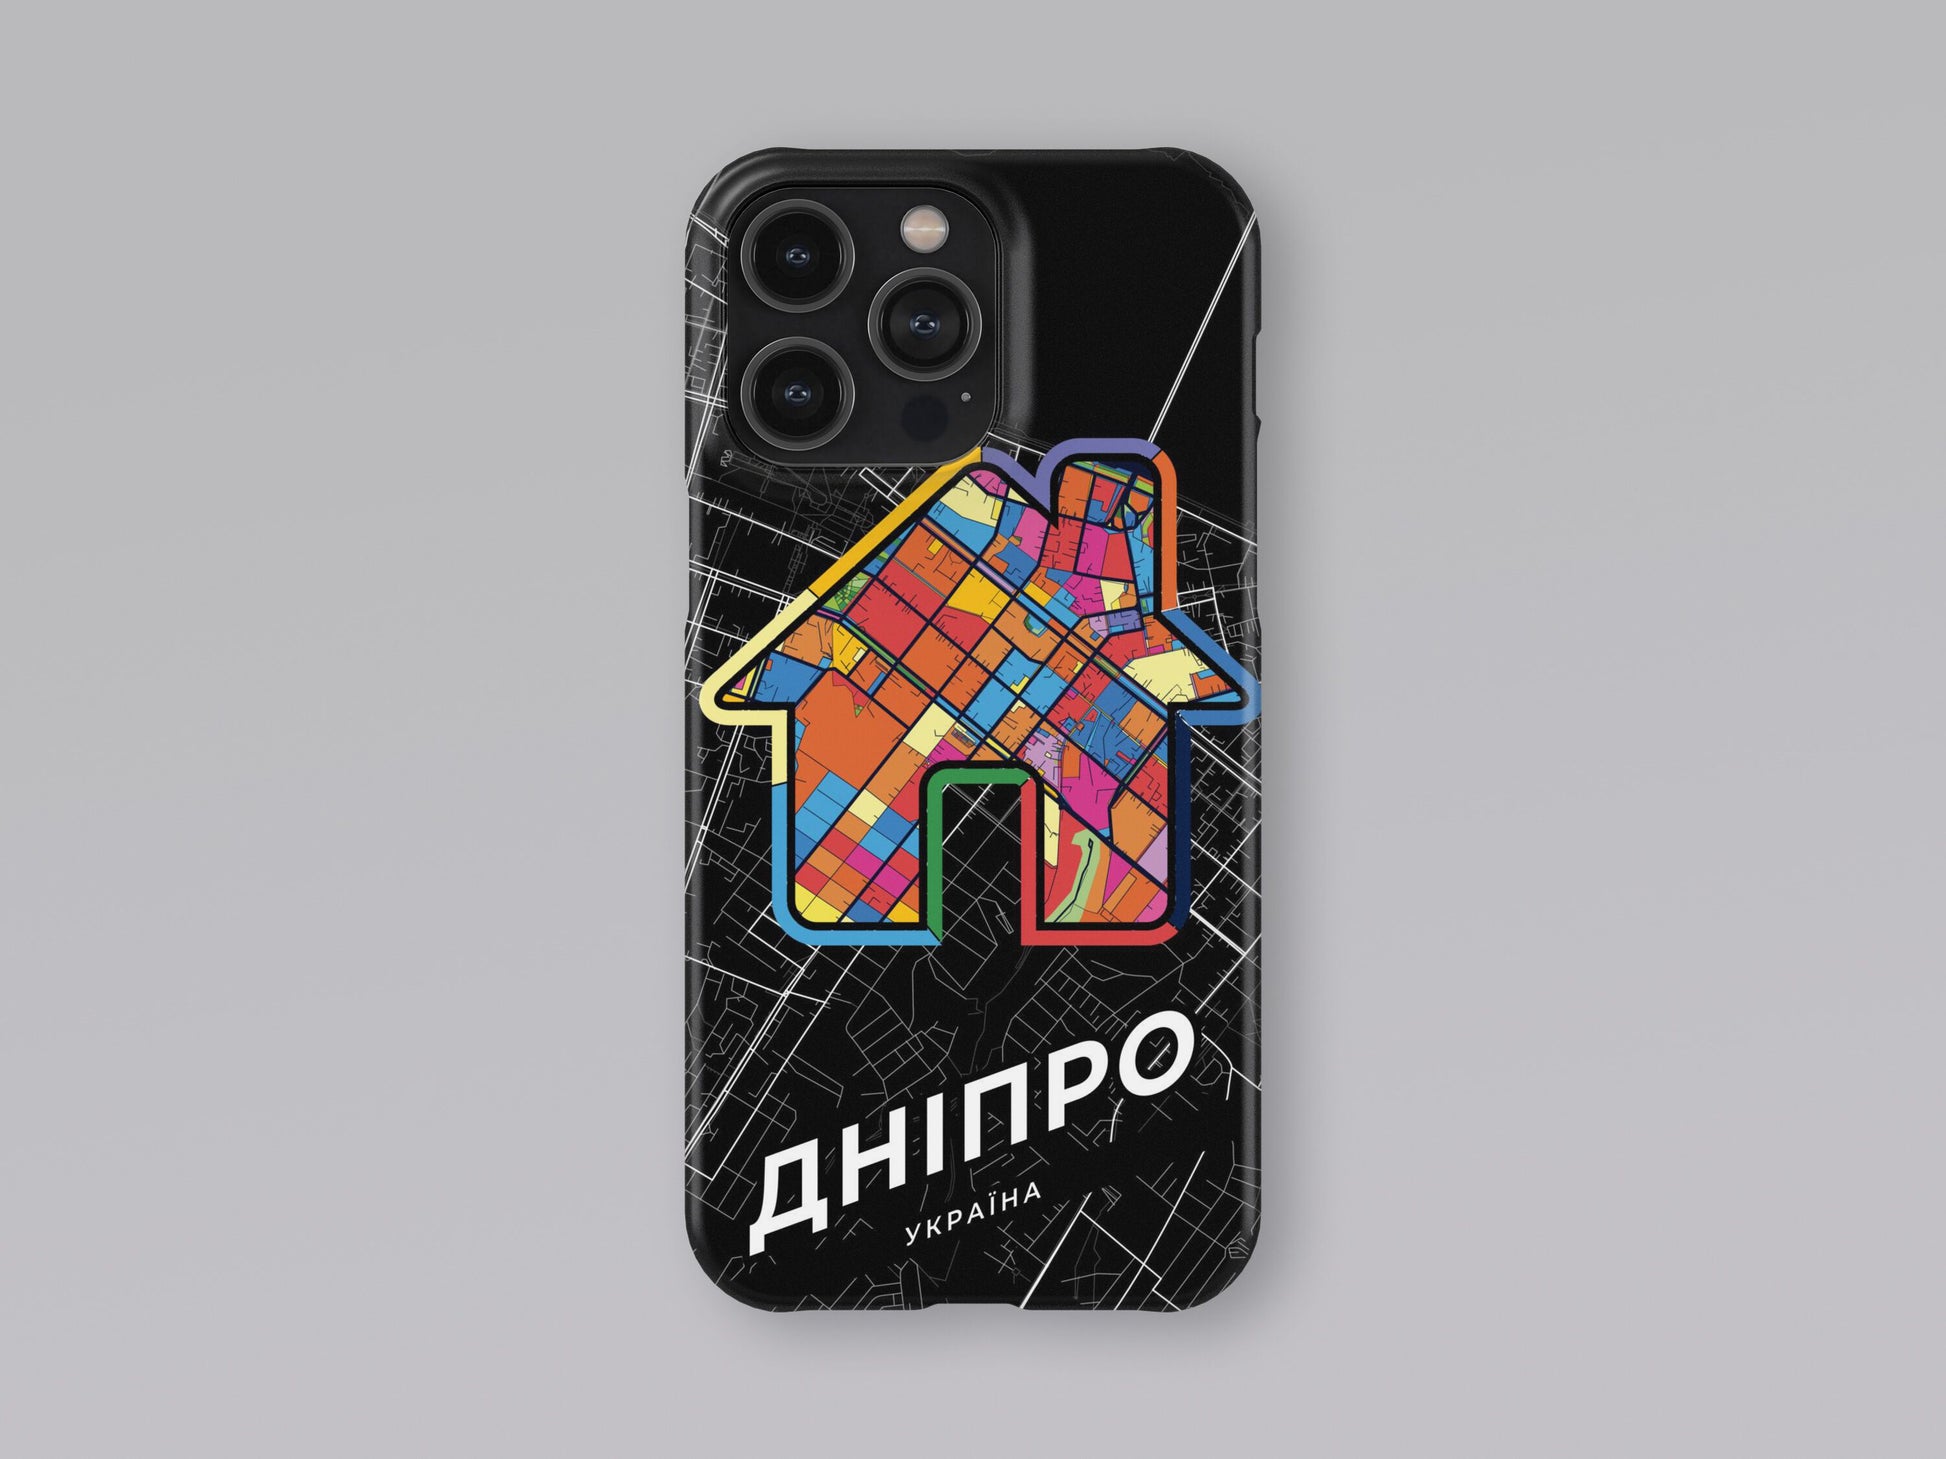 Dnipro Ukraine slim phone case with colorful icon. Birthday, wedding or housewarming gift. Couple match cases. 3